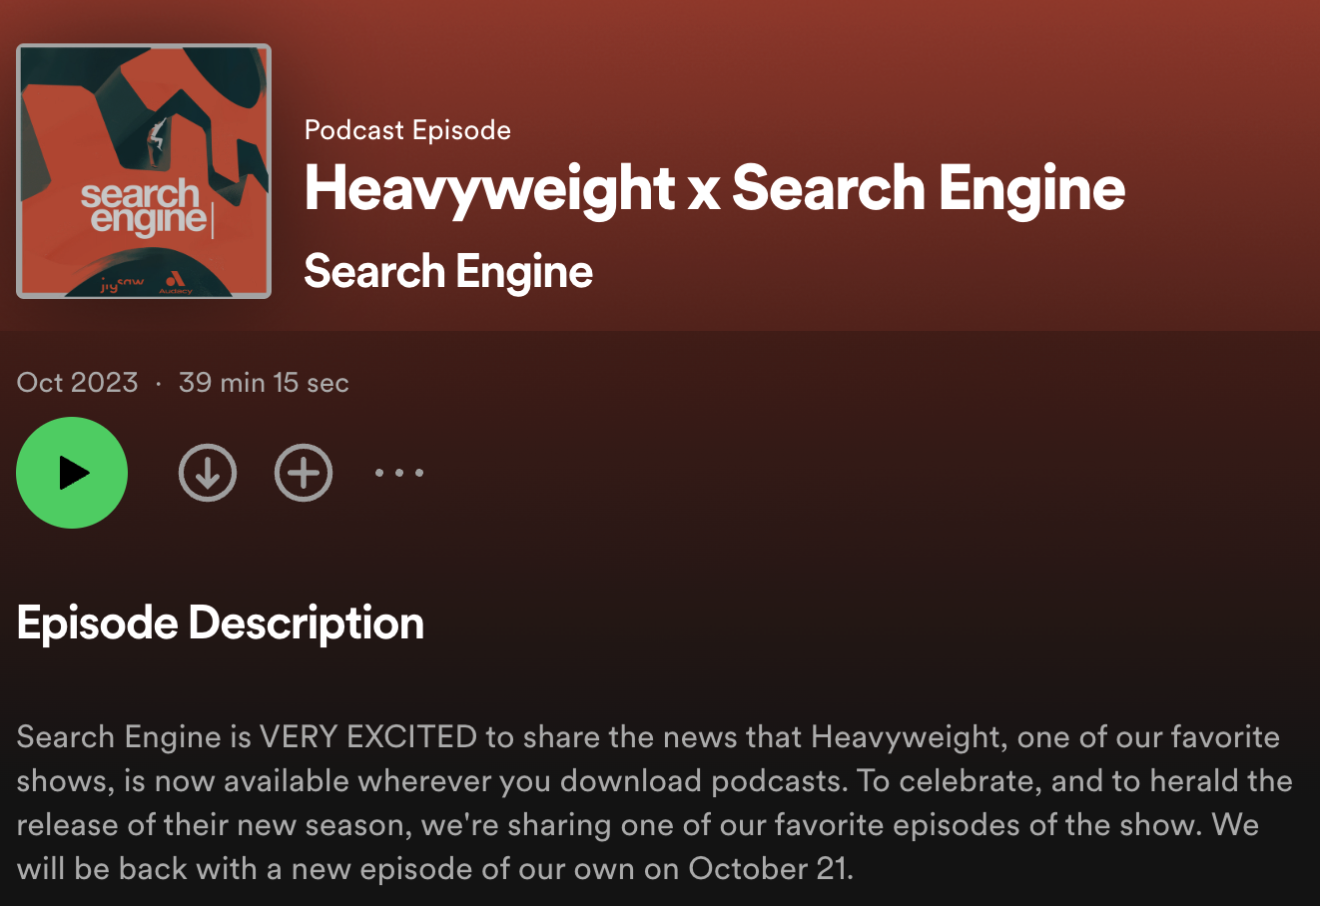 The episode description page for Search Engine featuring an episode from another podcast called Heavyweight.